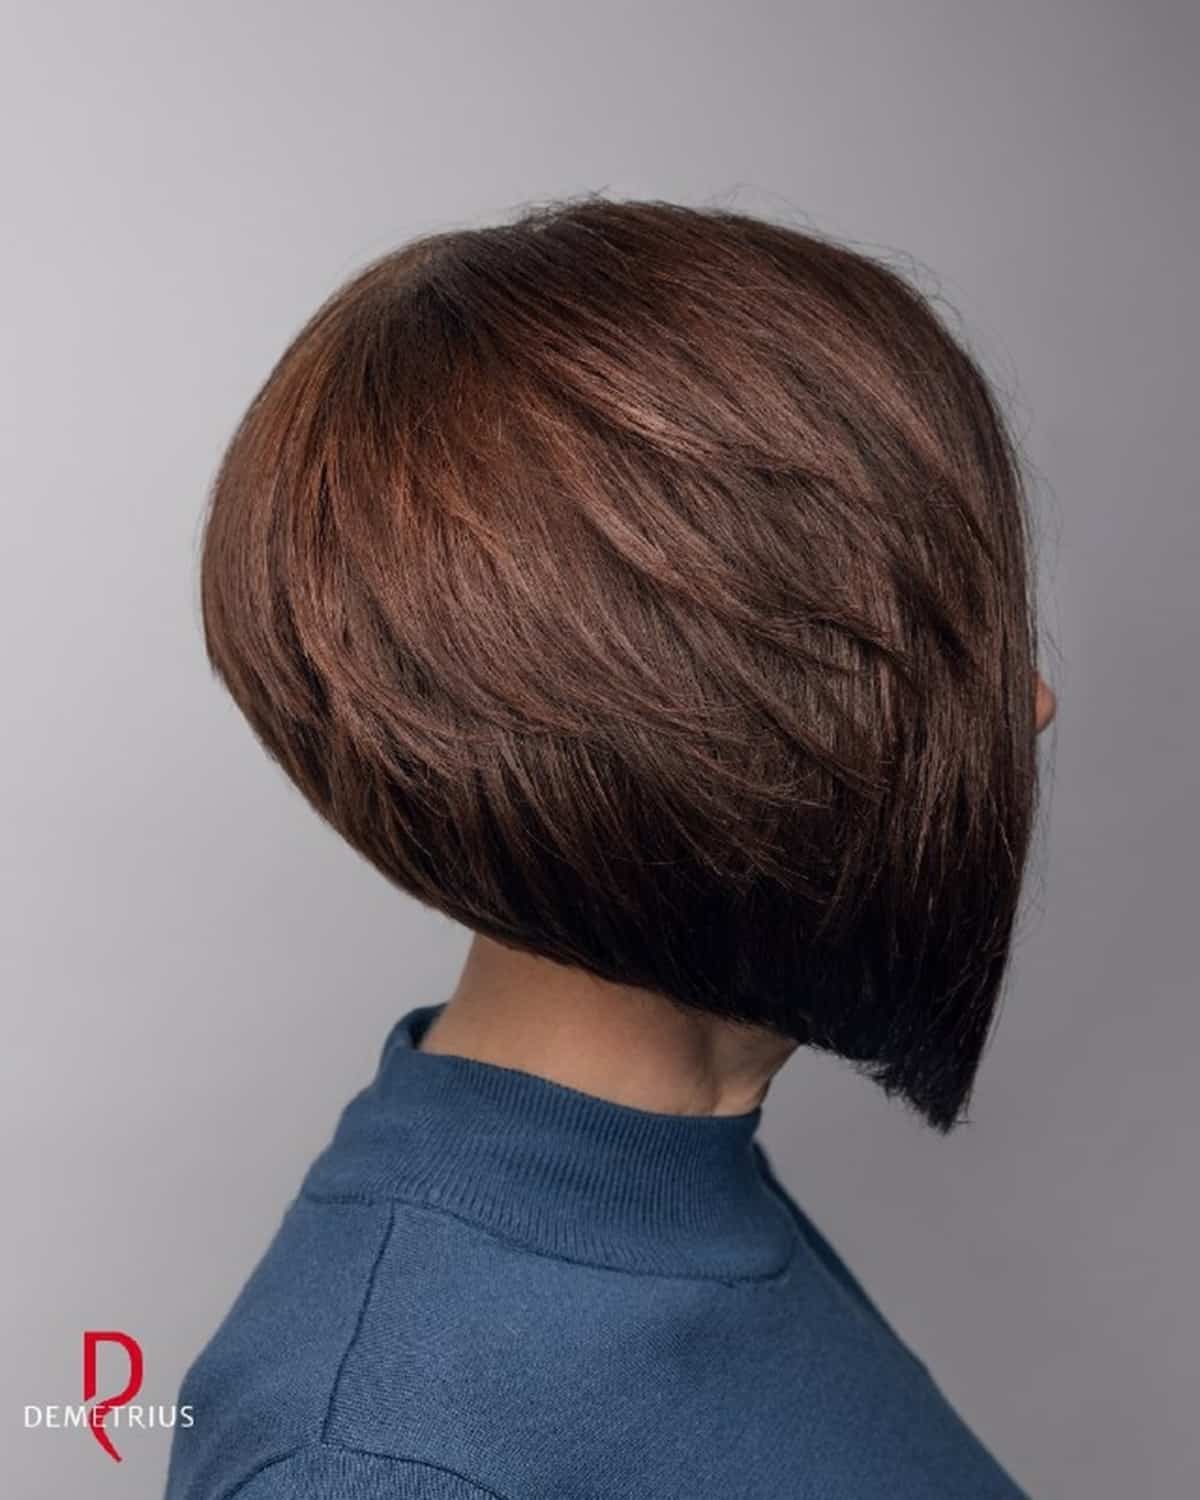 Heavily layered textured inverted bob